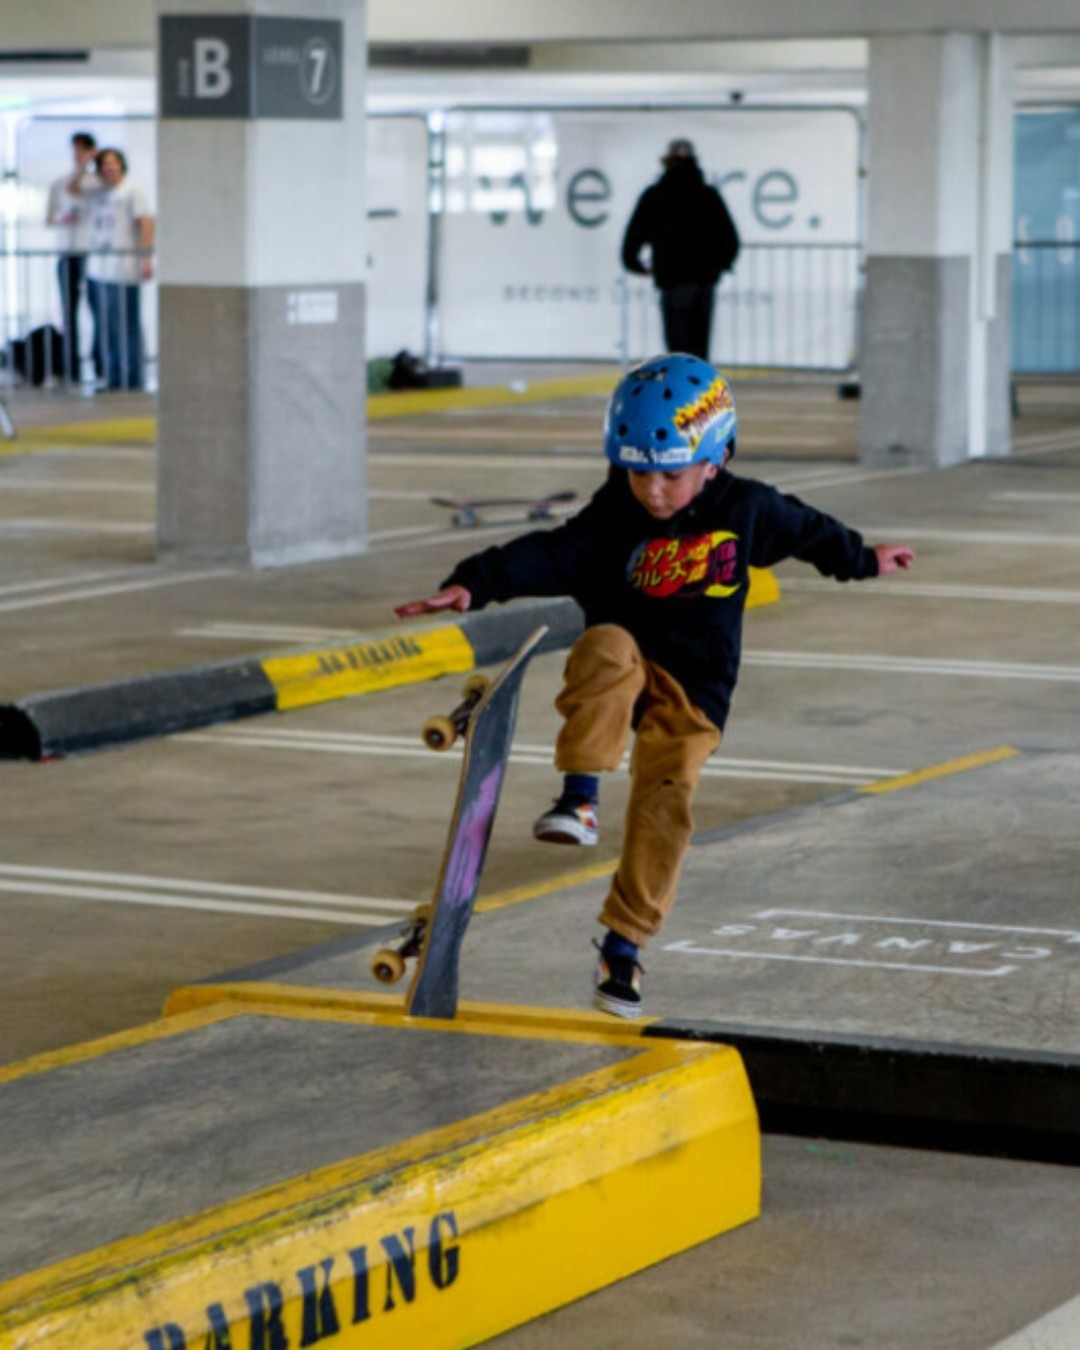 A young boy performing tricks at the Cabot Circus Skate Park in Bristol